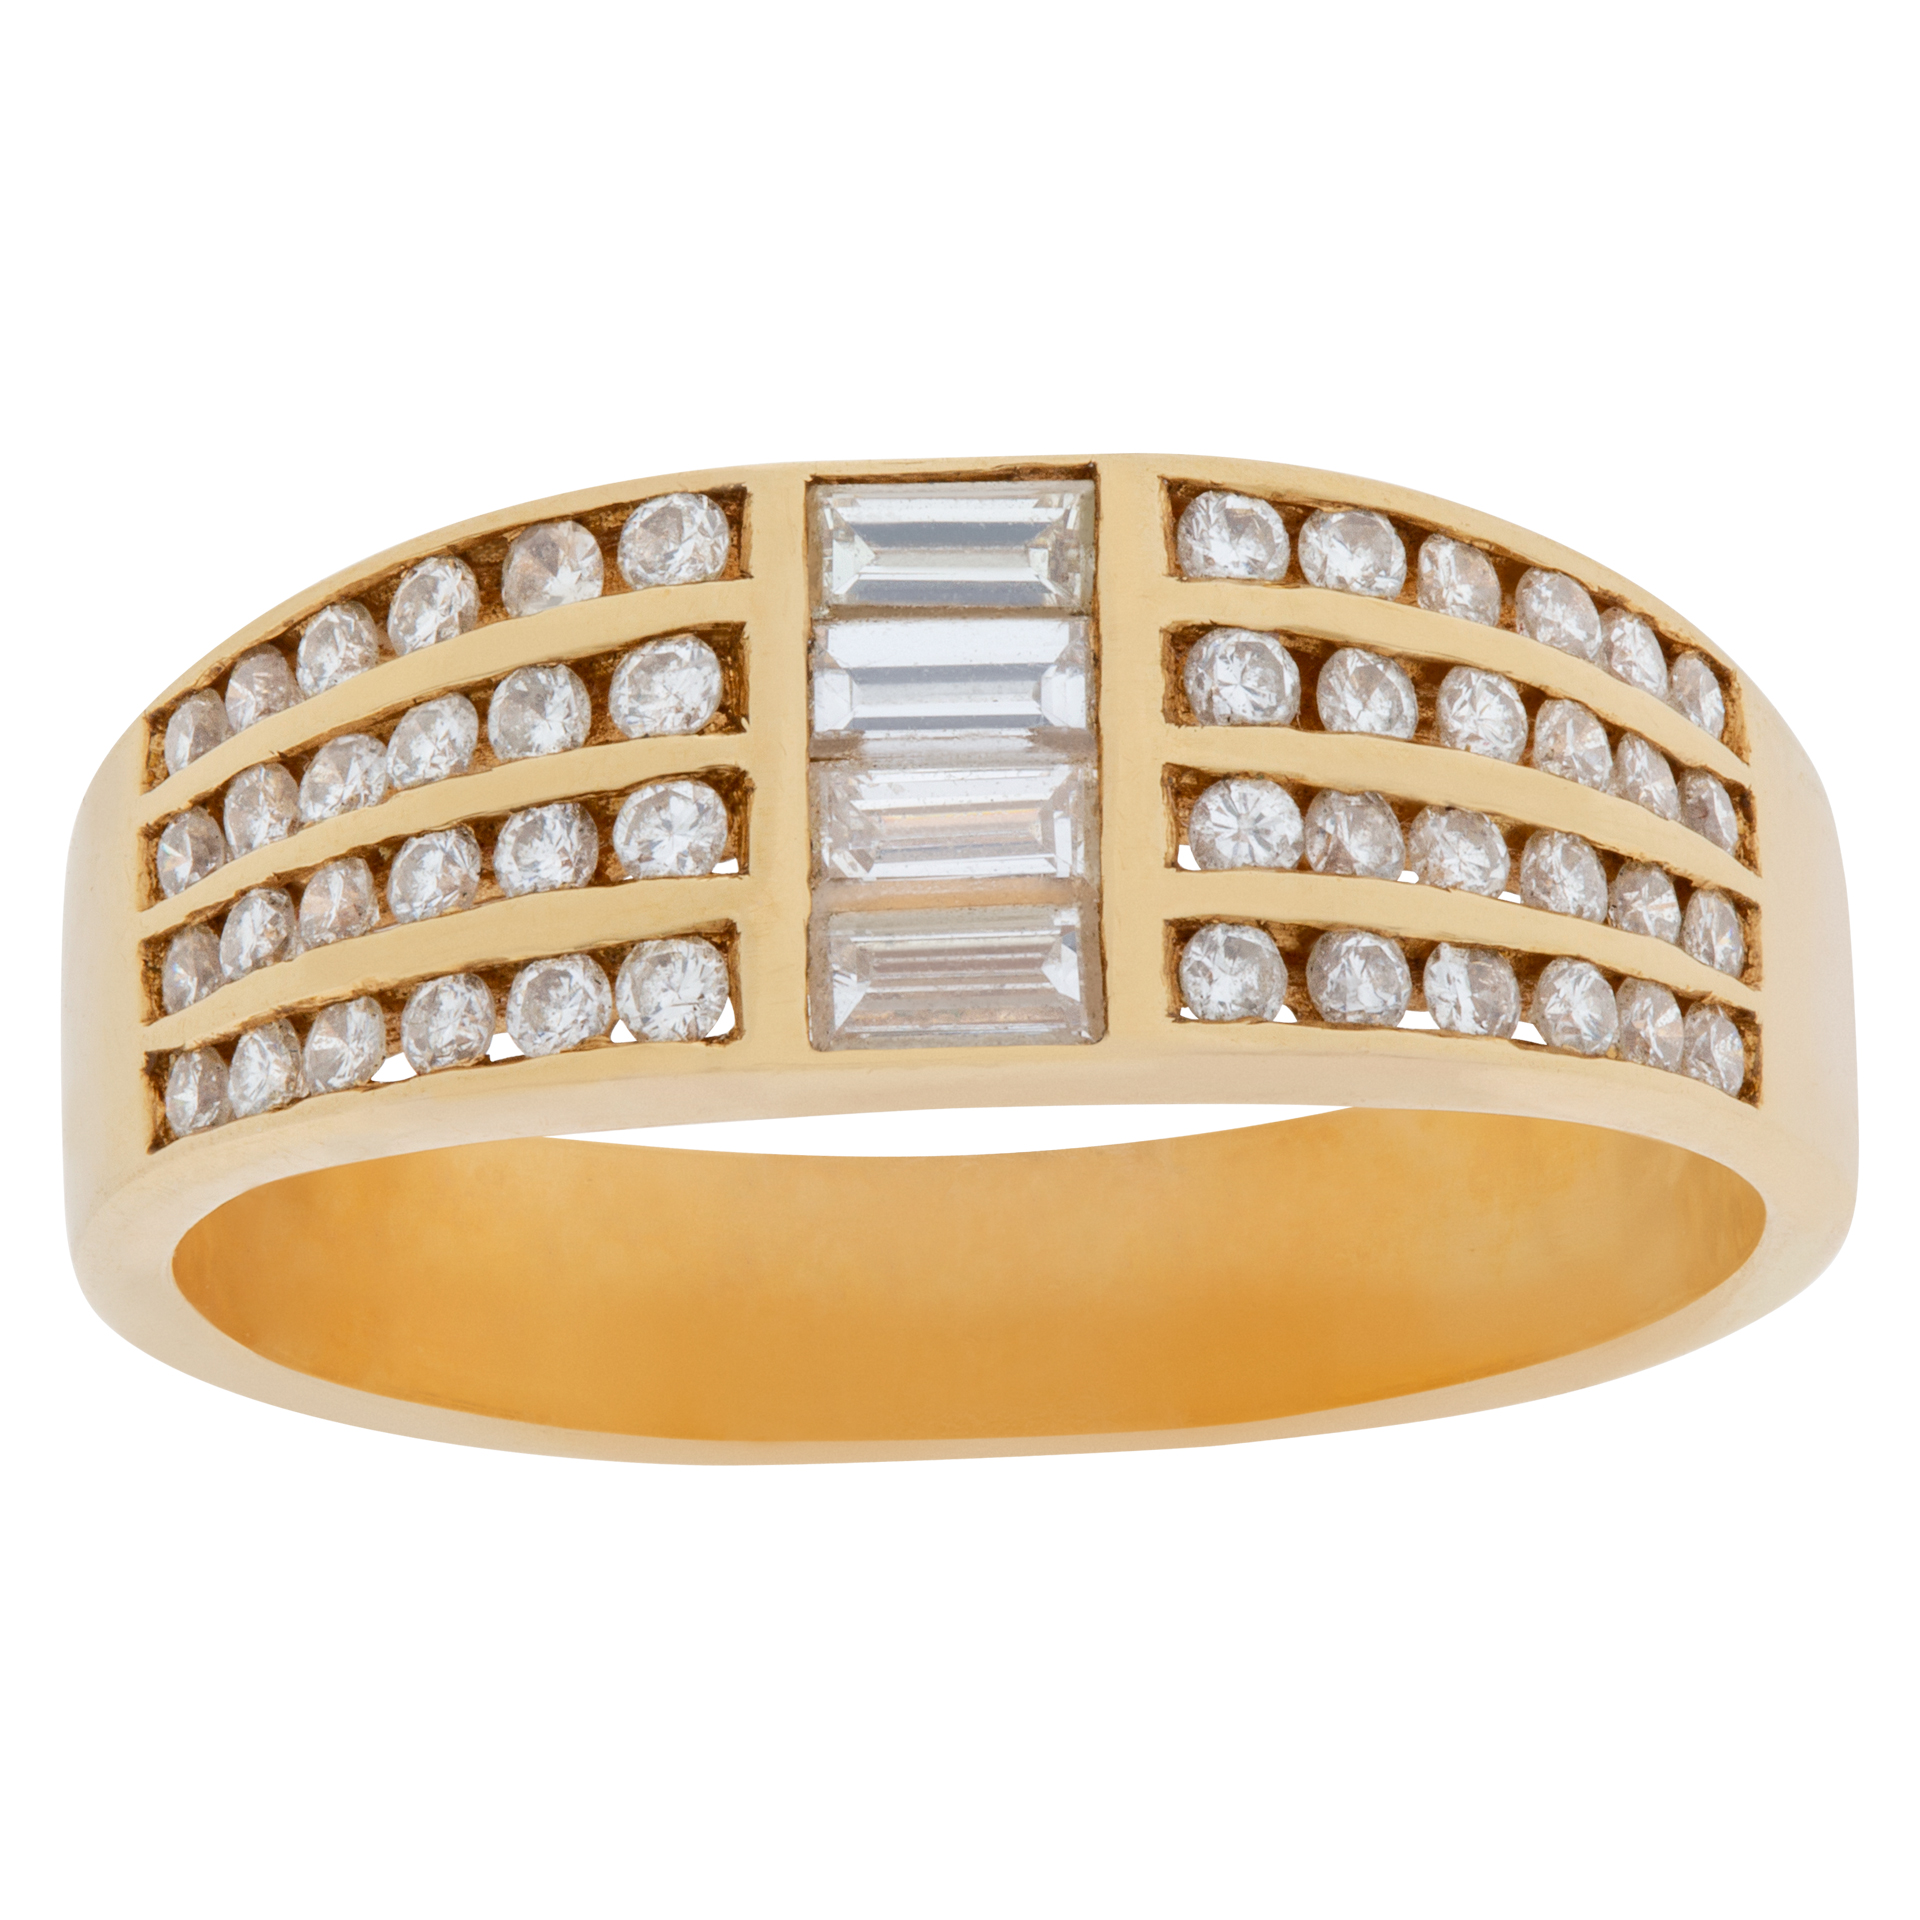 Channel-set baguette & round diamond ring in 14k. 0.70 carats in diamonds